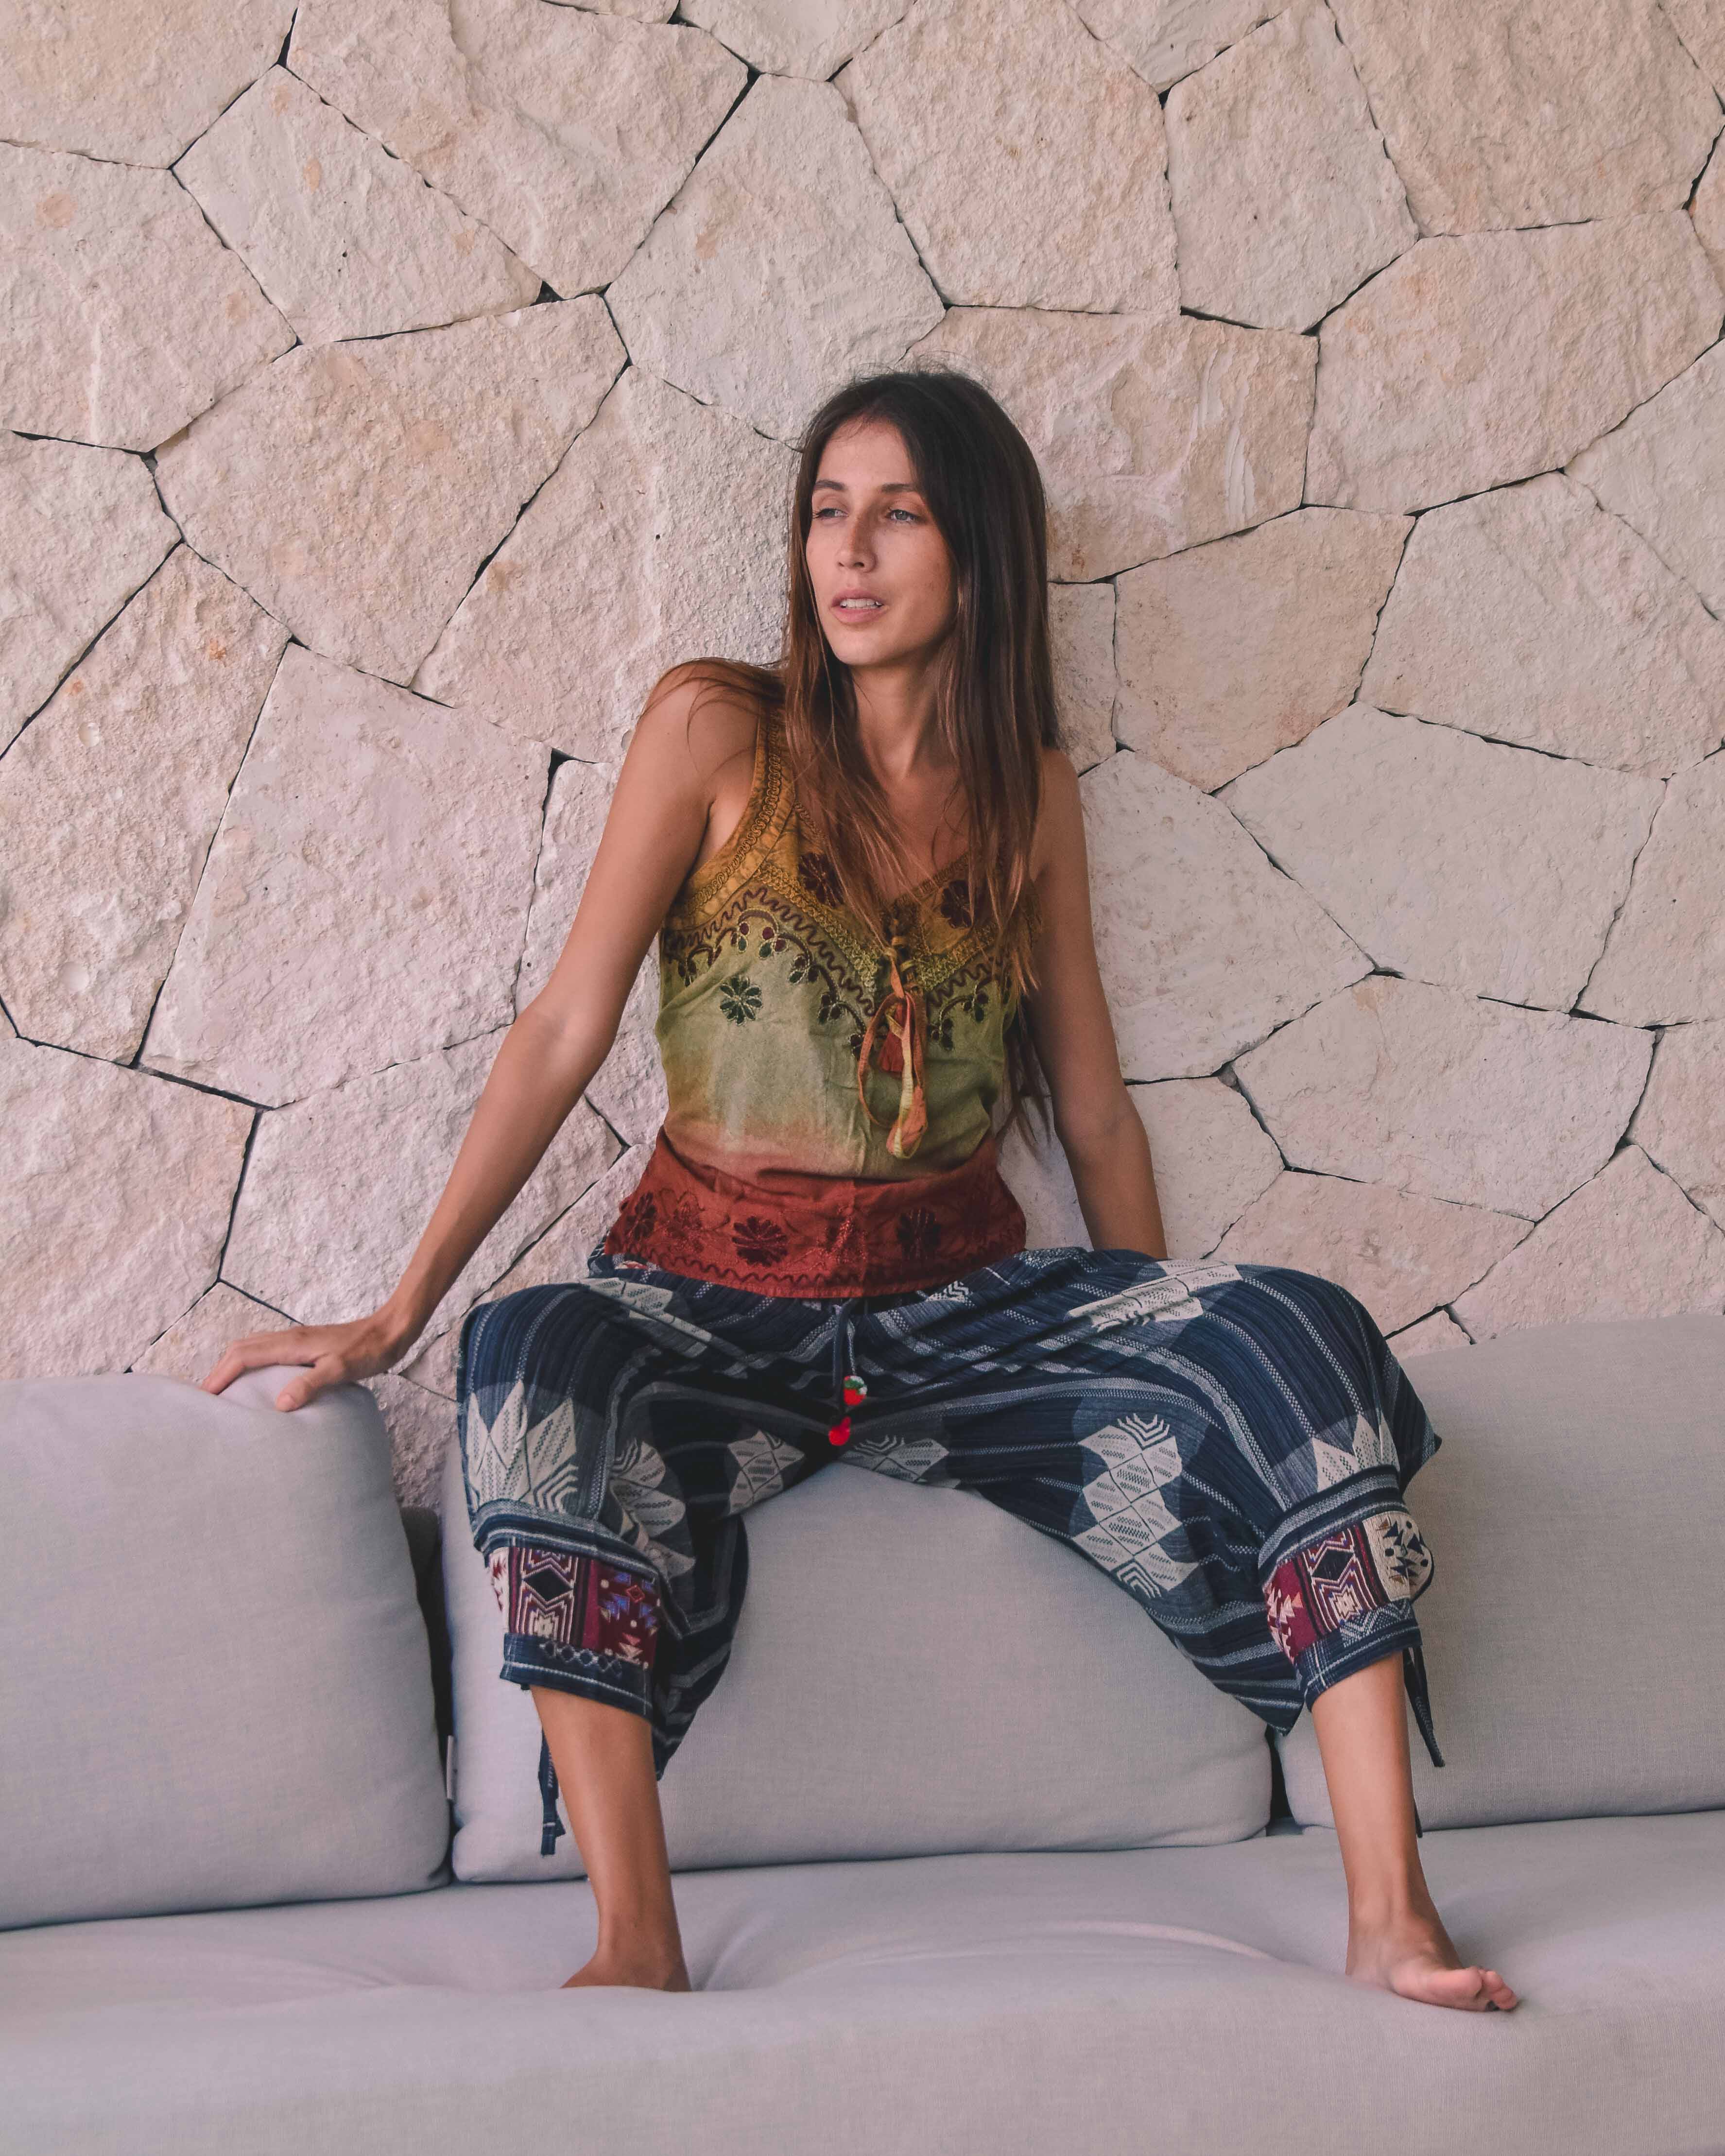 JAIPUR BLOUSE Elepanta Women's Top - Buy Today Elephant Pants Jewelry And Bohemian Clothes Handmade In Thailand Help To Save The Elephants FairTrade And Vegan